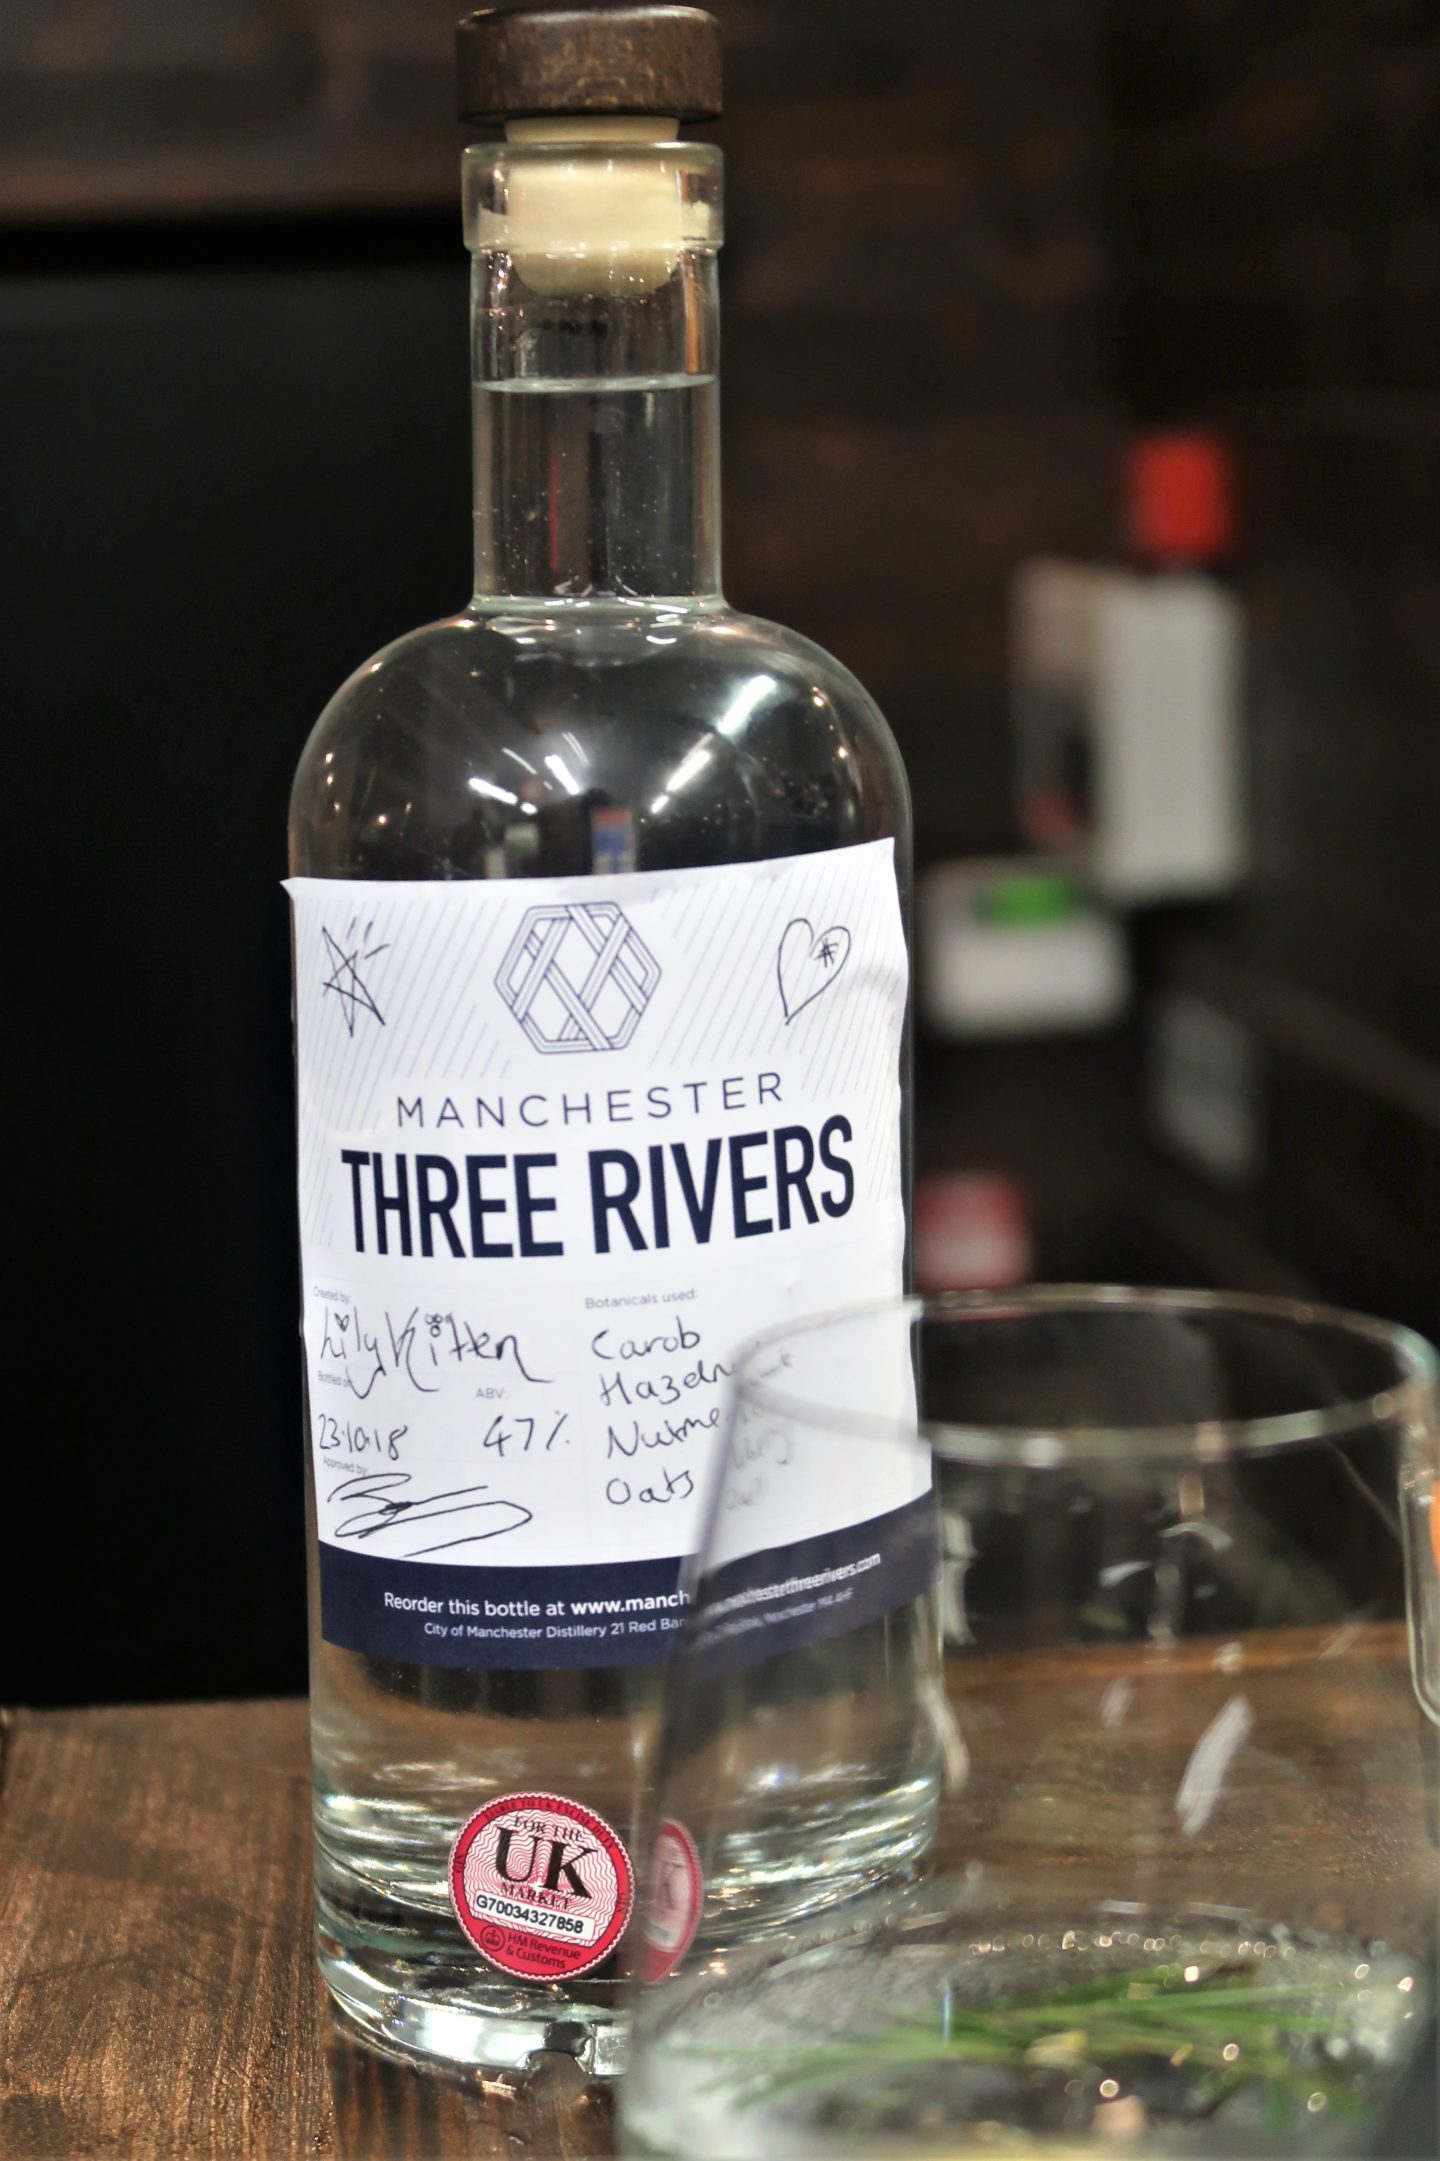 Manchester Three Rivers Gin Experience TripAdvisor’s No.1 ‘Thing To Do in Manchester’